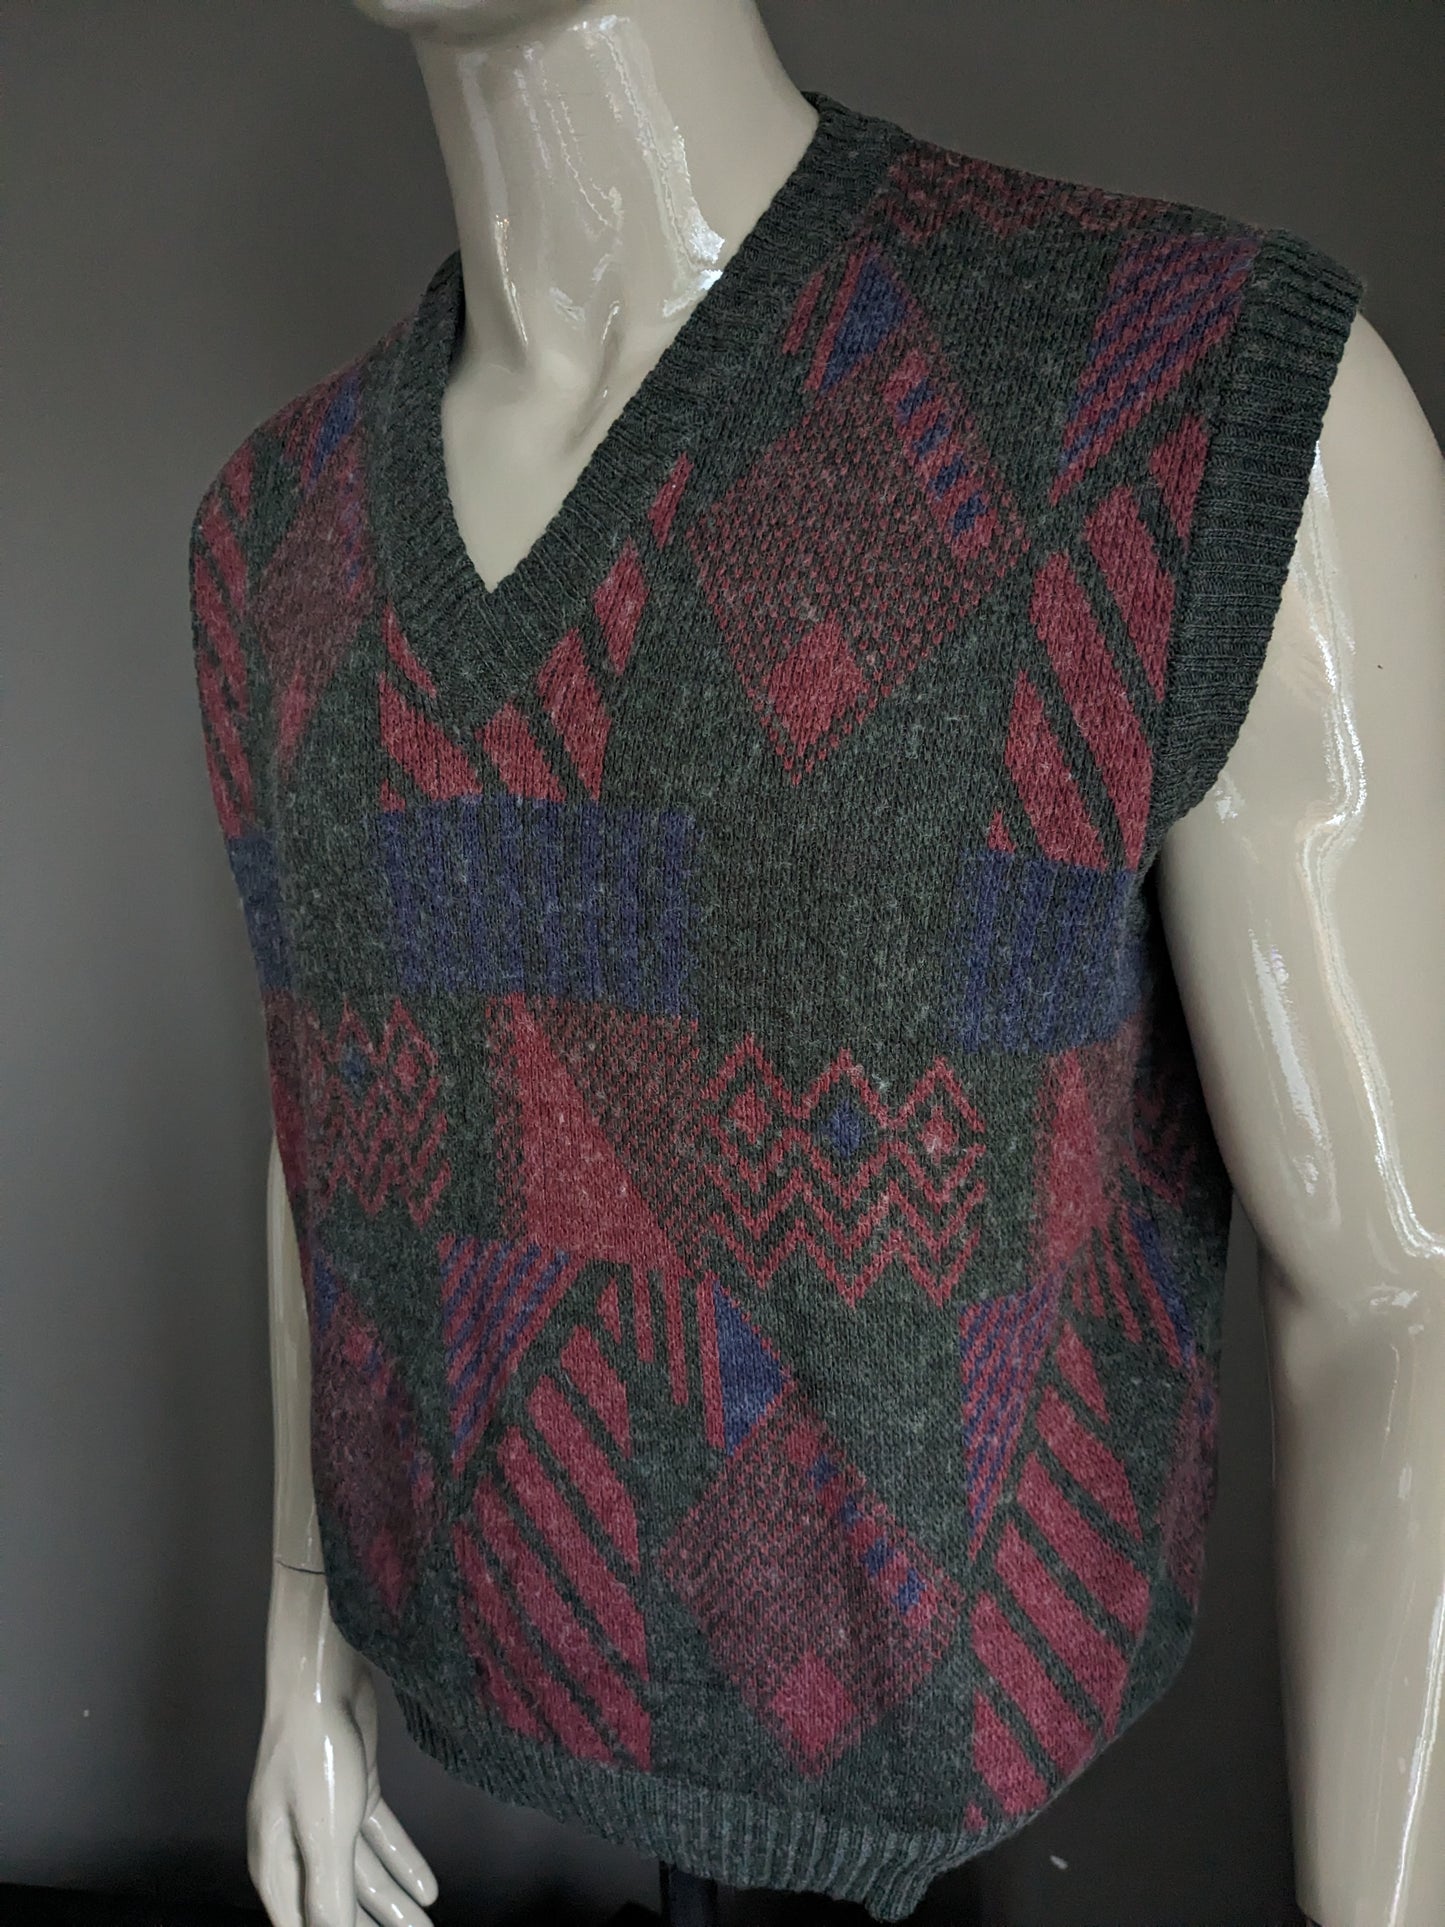 Vintage wool spencer. Gray red purple colored. Size XL. 30% wool.